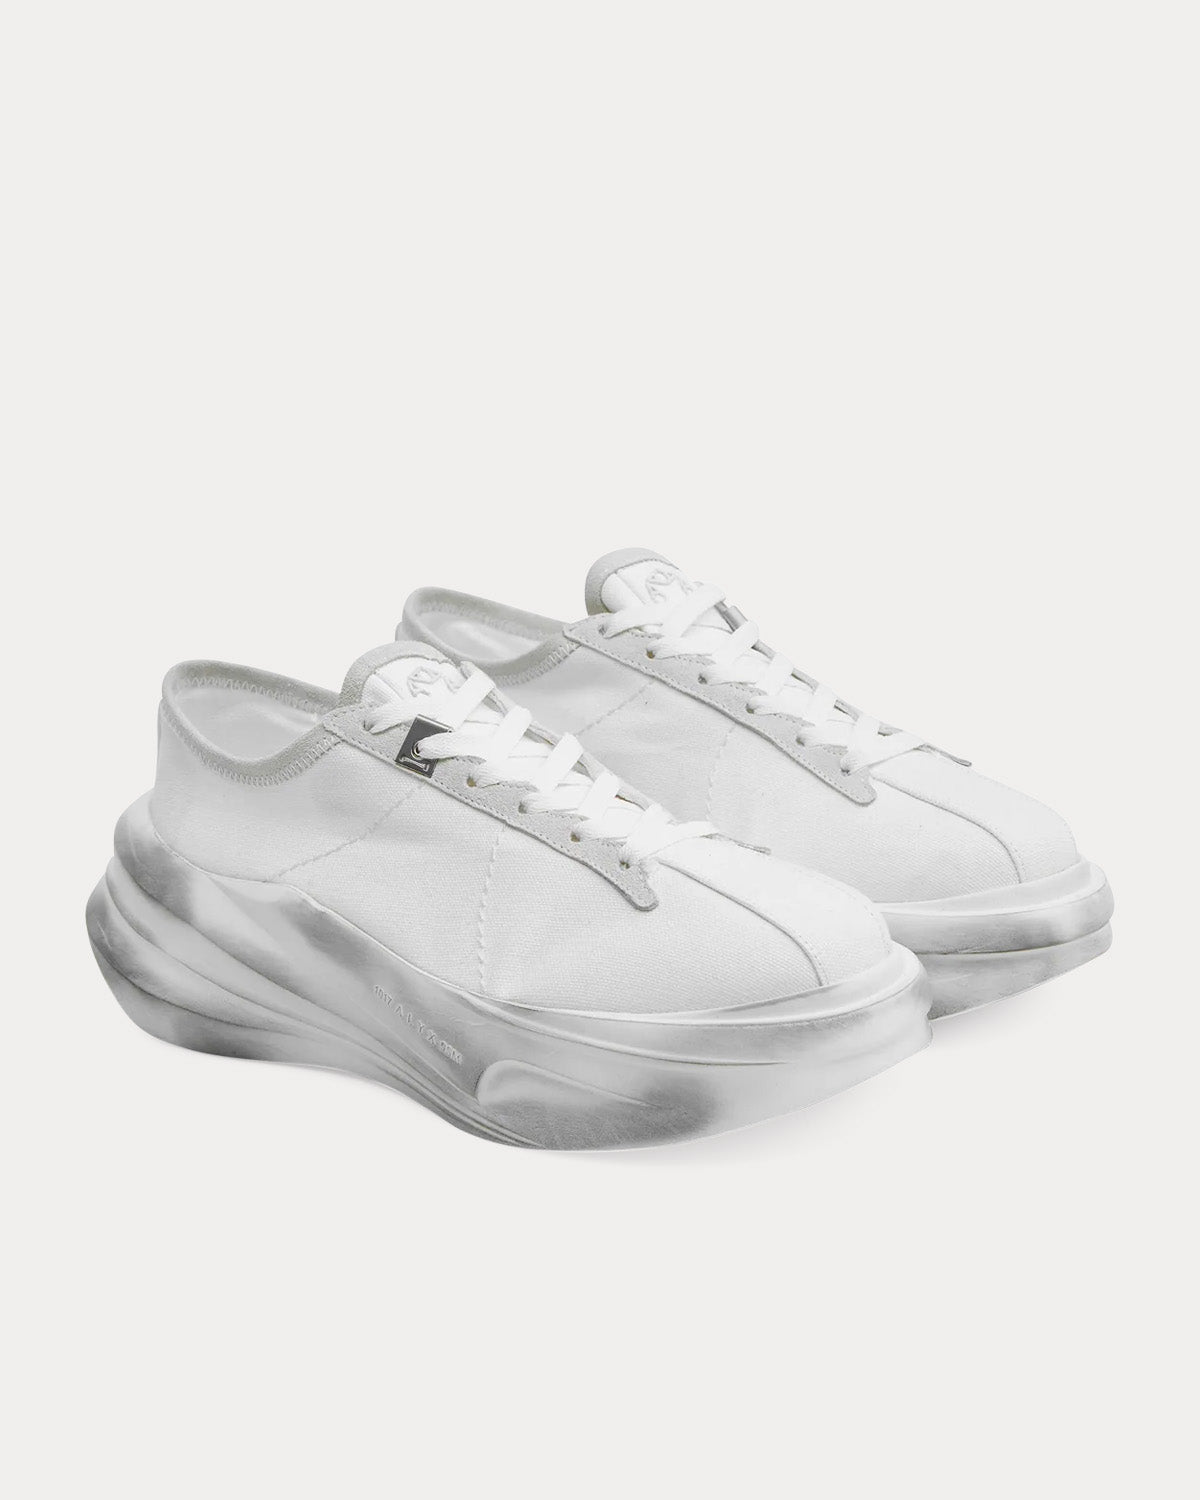 1017 ALYX 9SM - Treated Aria White Low Top Sneakers